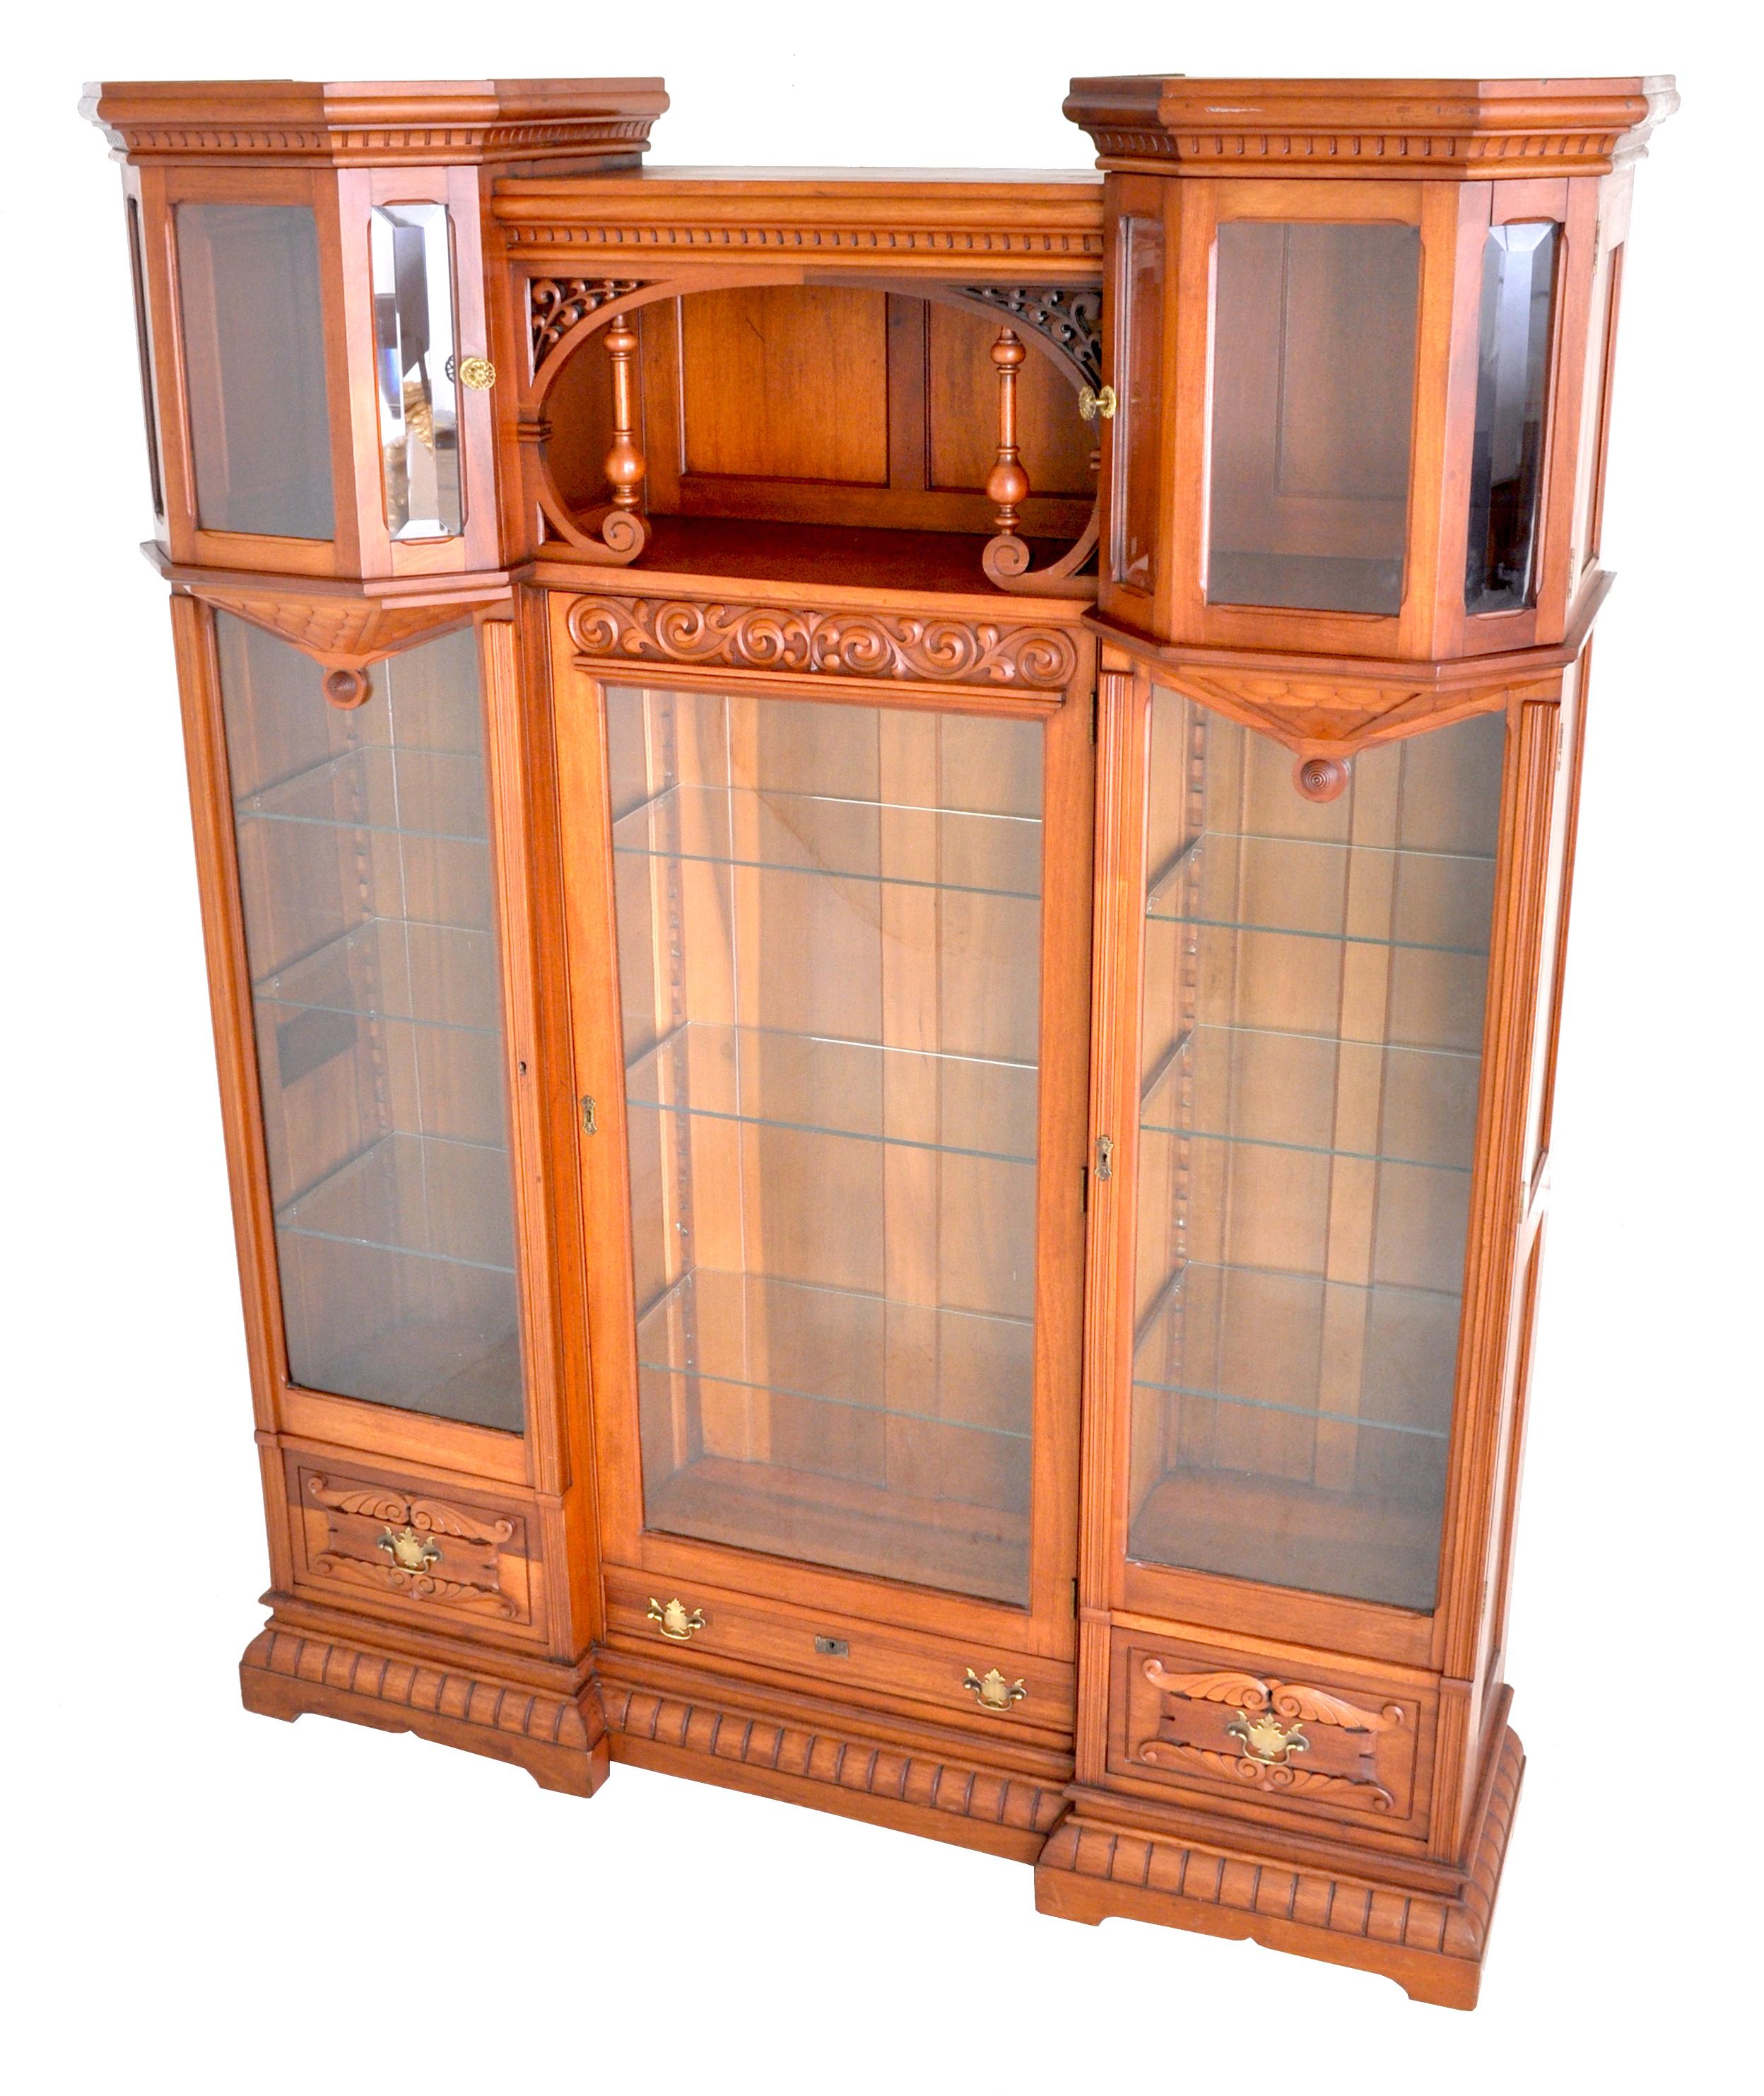 Antique American Eastlake walnut breakfront bookcase/hutch/cabinet, circa 1890. To the center is an area with pierced brackets and turned supports flanked by two turret style doors with beveled glass, the turrets having dentil molding to the top and